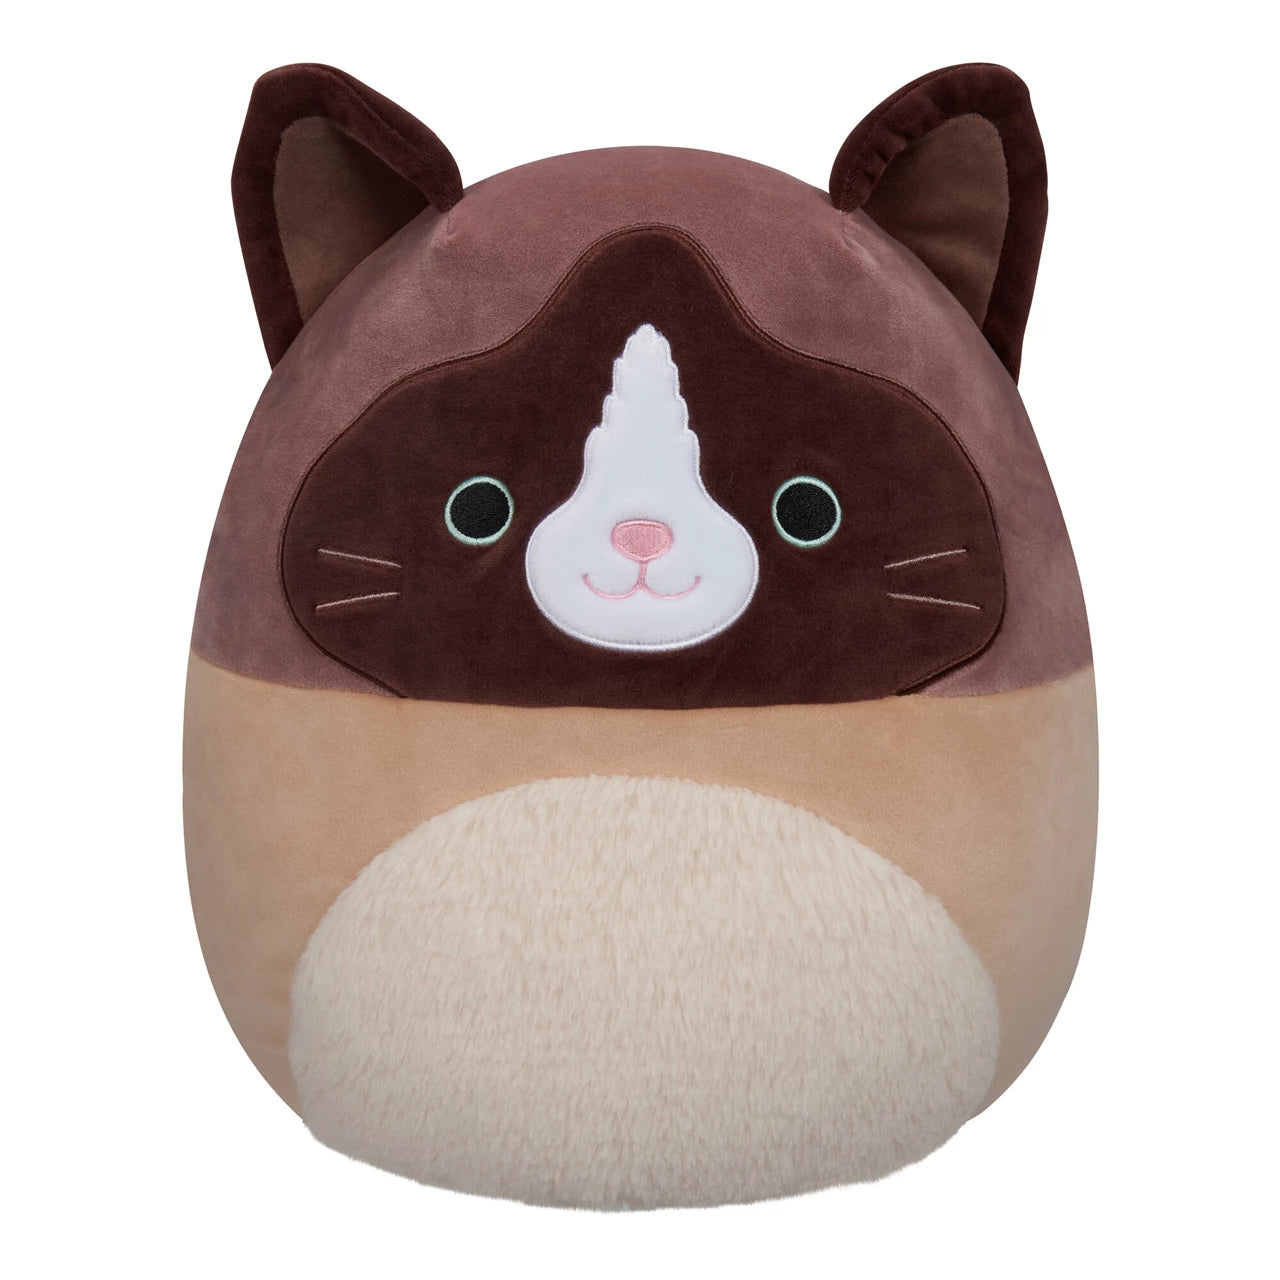 Squishmallow Woodward the Brown and Tan Snowshoe Cat 12 inch Plush